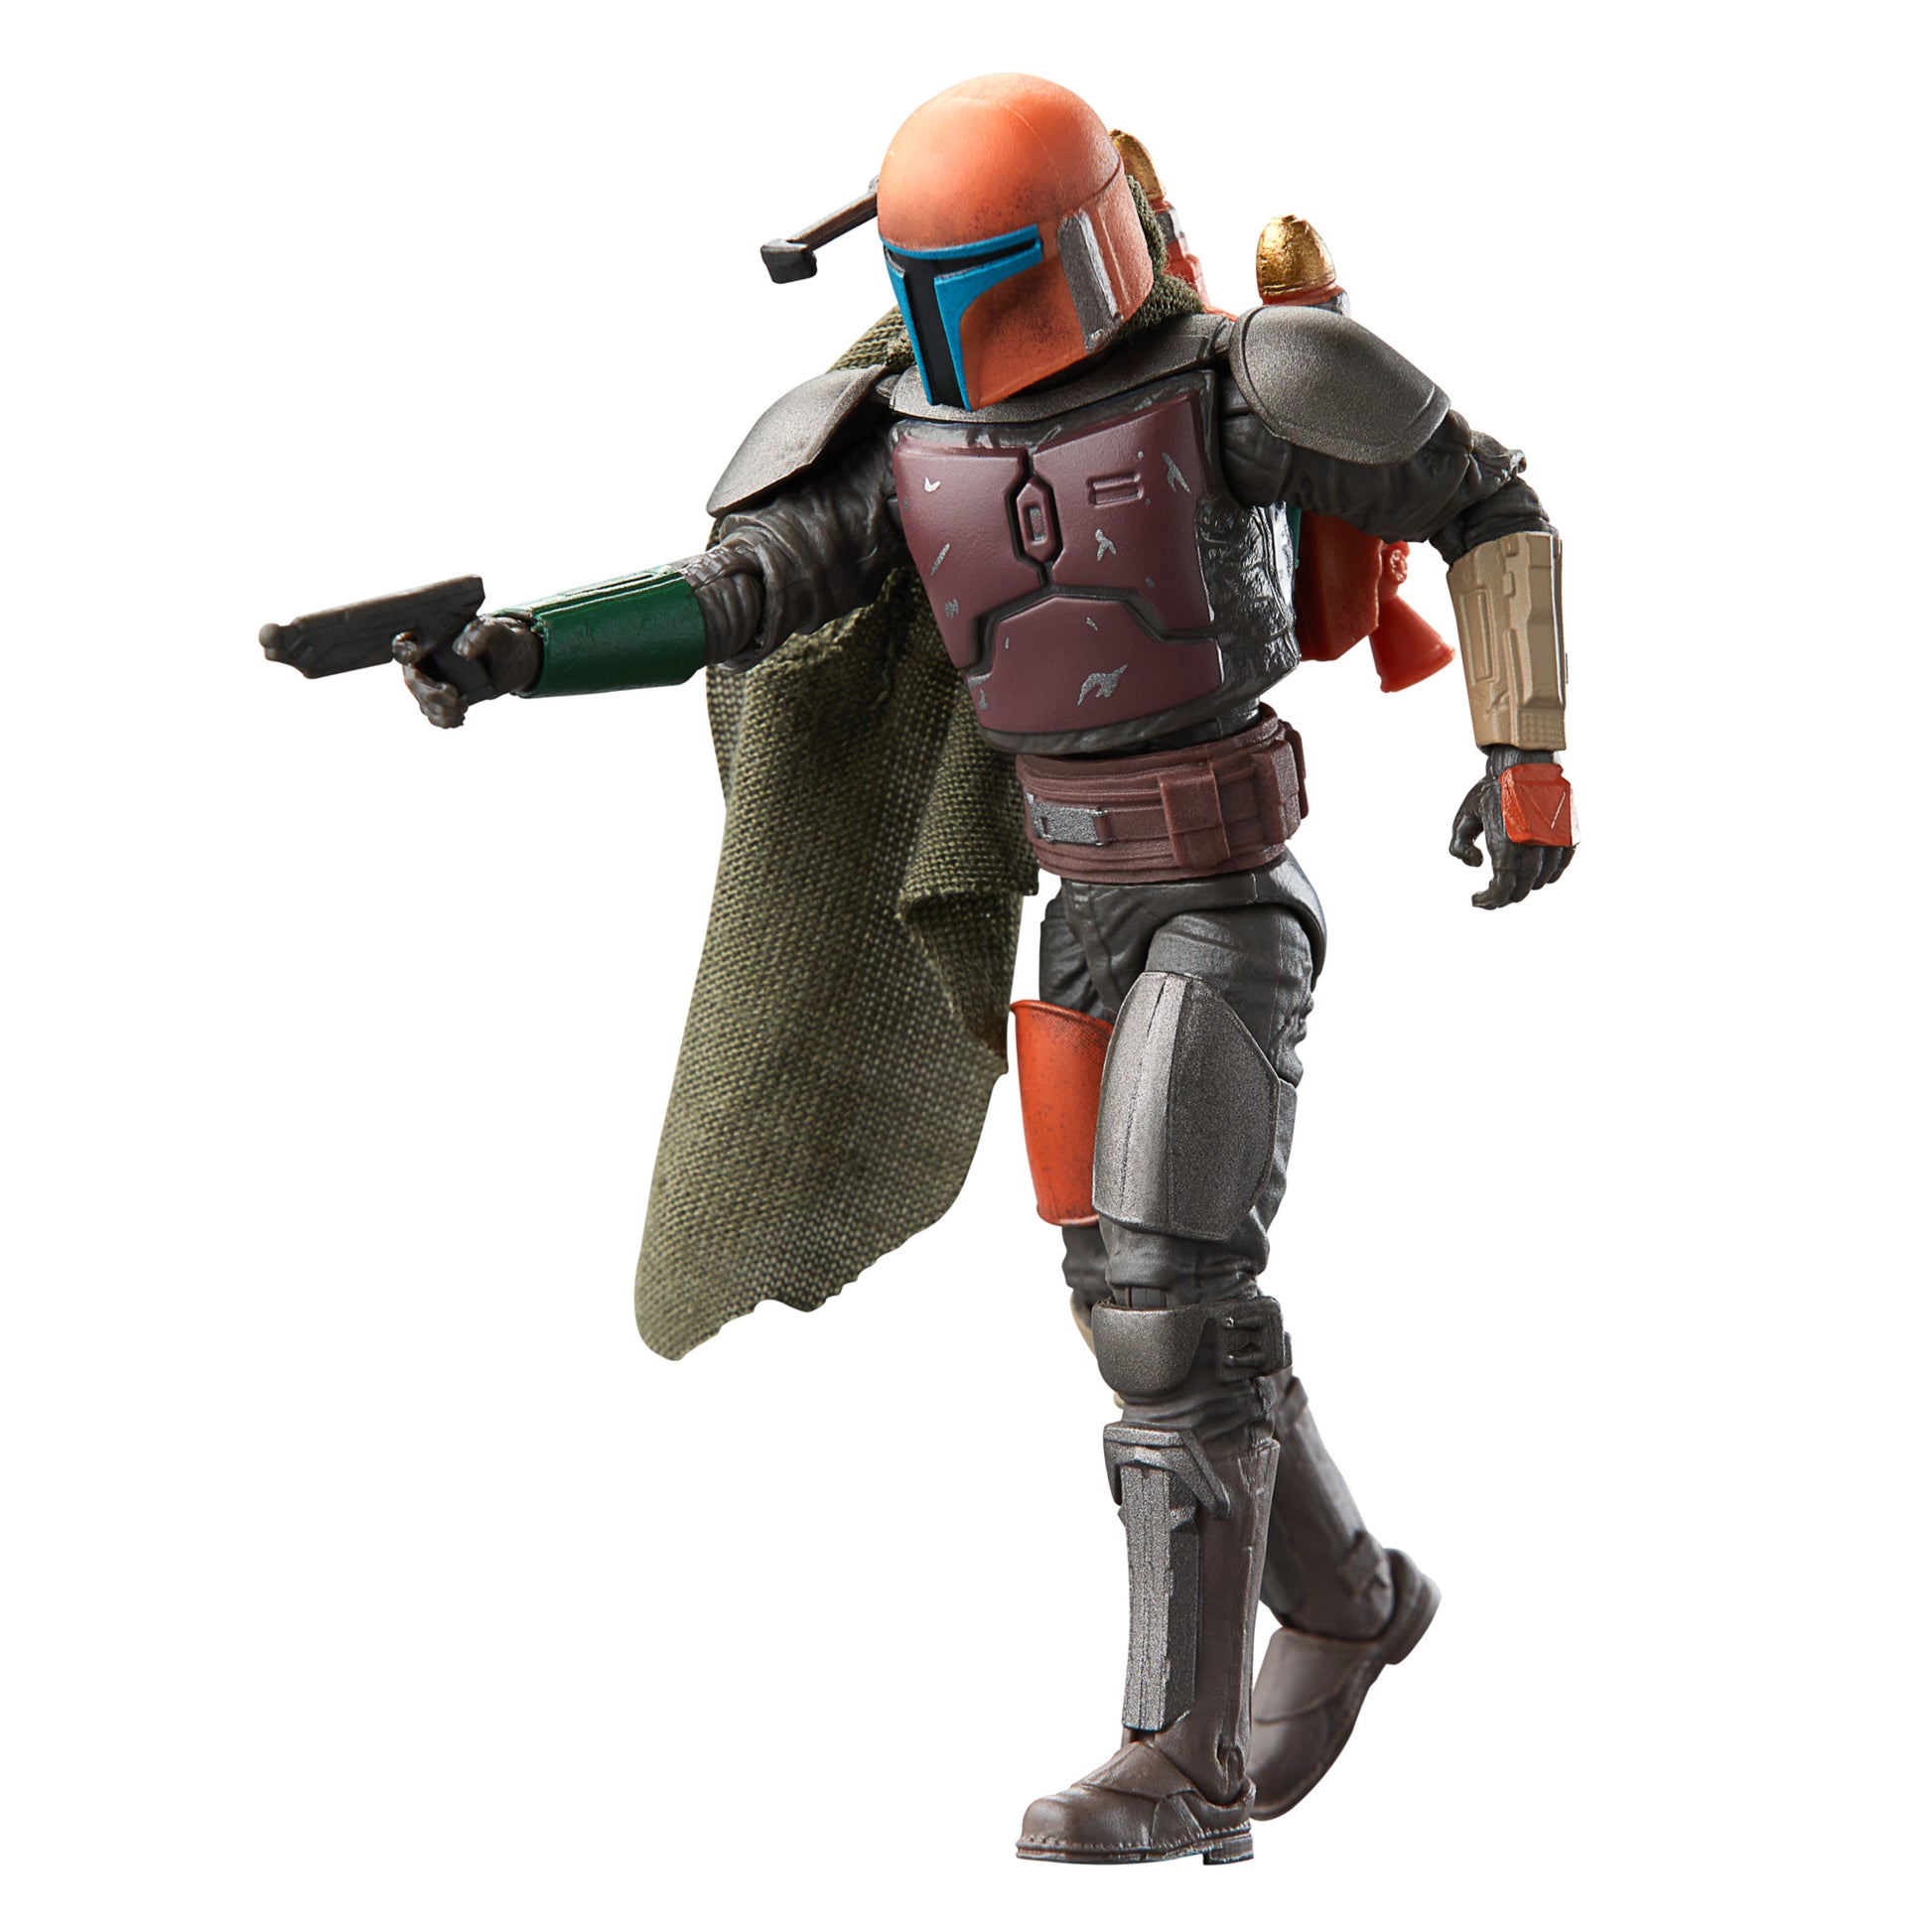 Star Wars The Vintage Collection Mandalorian Judge, Star Wars: The Mandalorian 3.75 Inch Collectible Action Figure